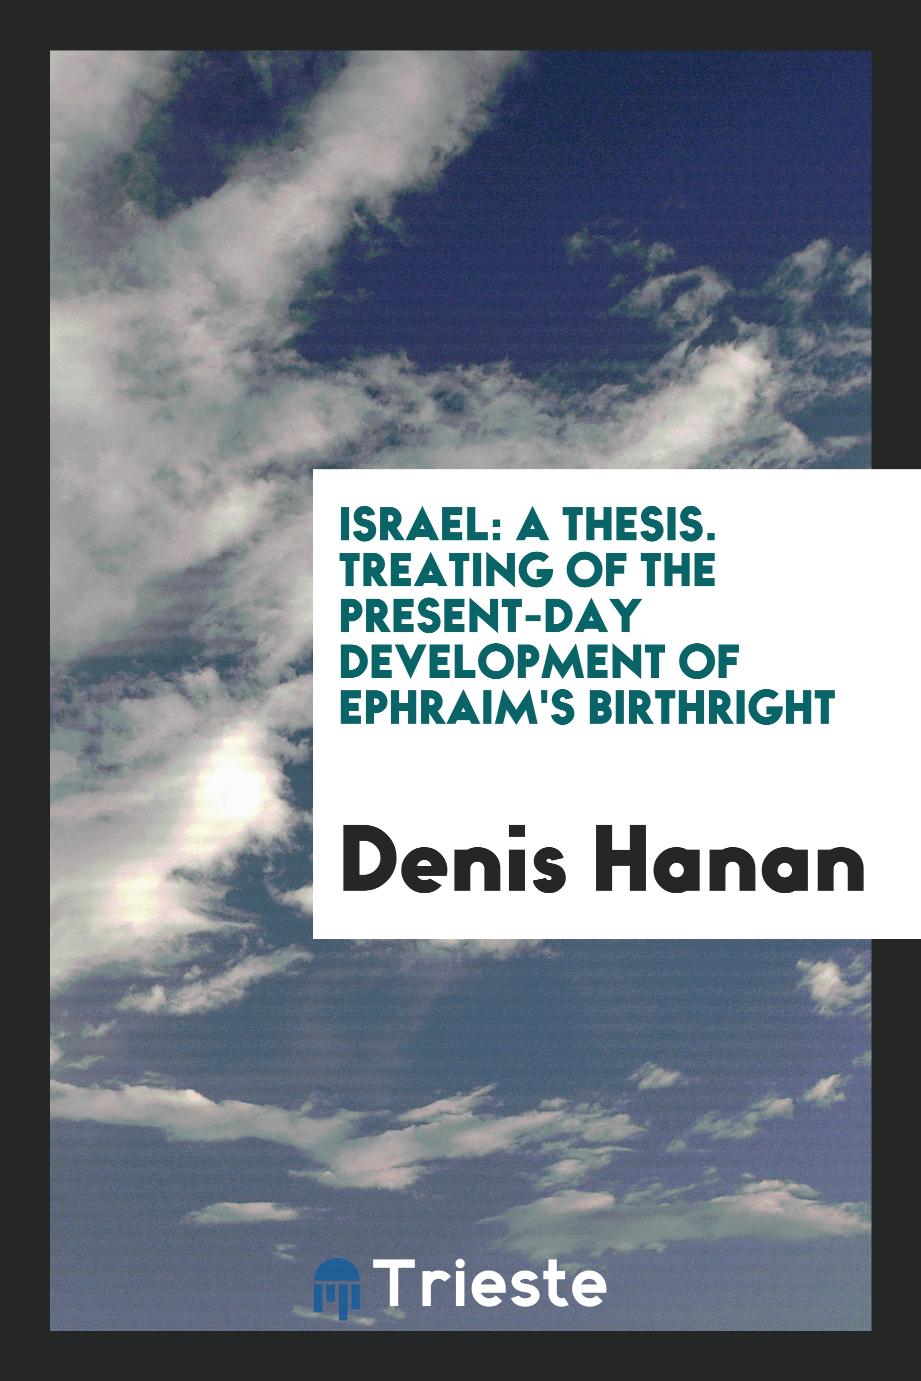 Israel: A Thesis. Treating of the Present-Day Development of Ephraim's Birthright